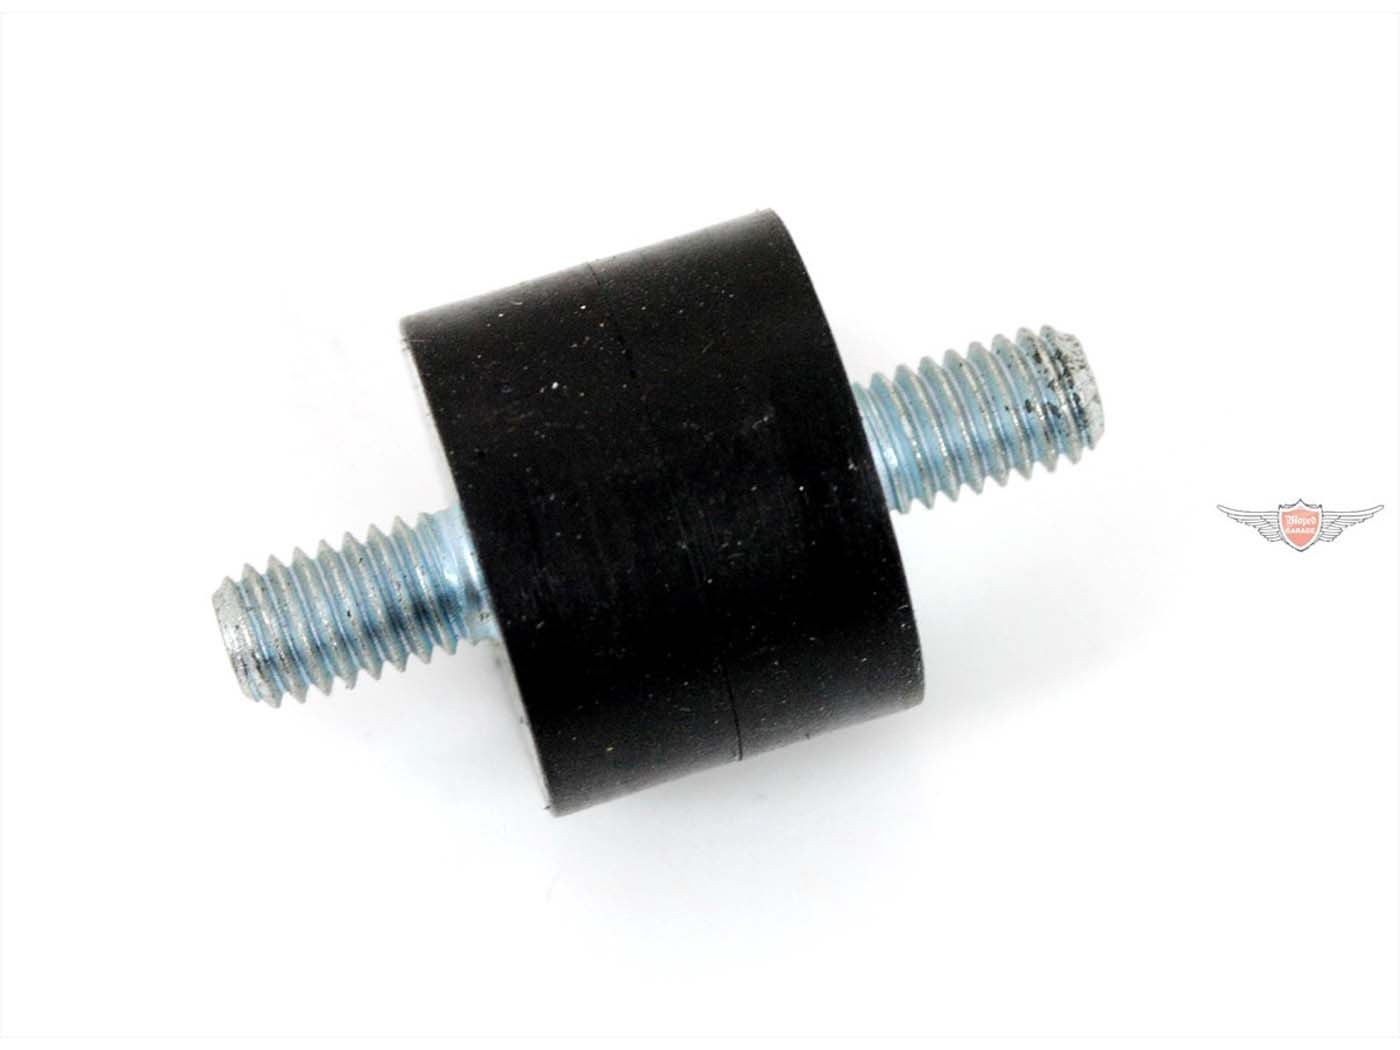 Retaining Rubber Thread 1 Piece Dimensions M6 X 10mm Rubber 20mm Diameter 15mm Height For Moped Mokick